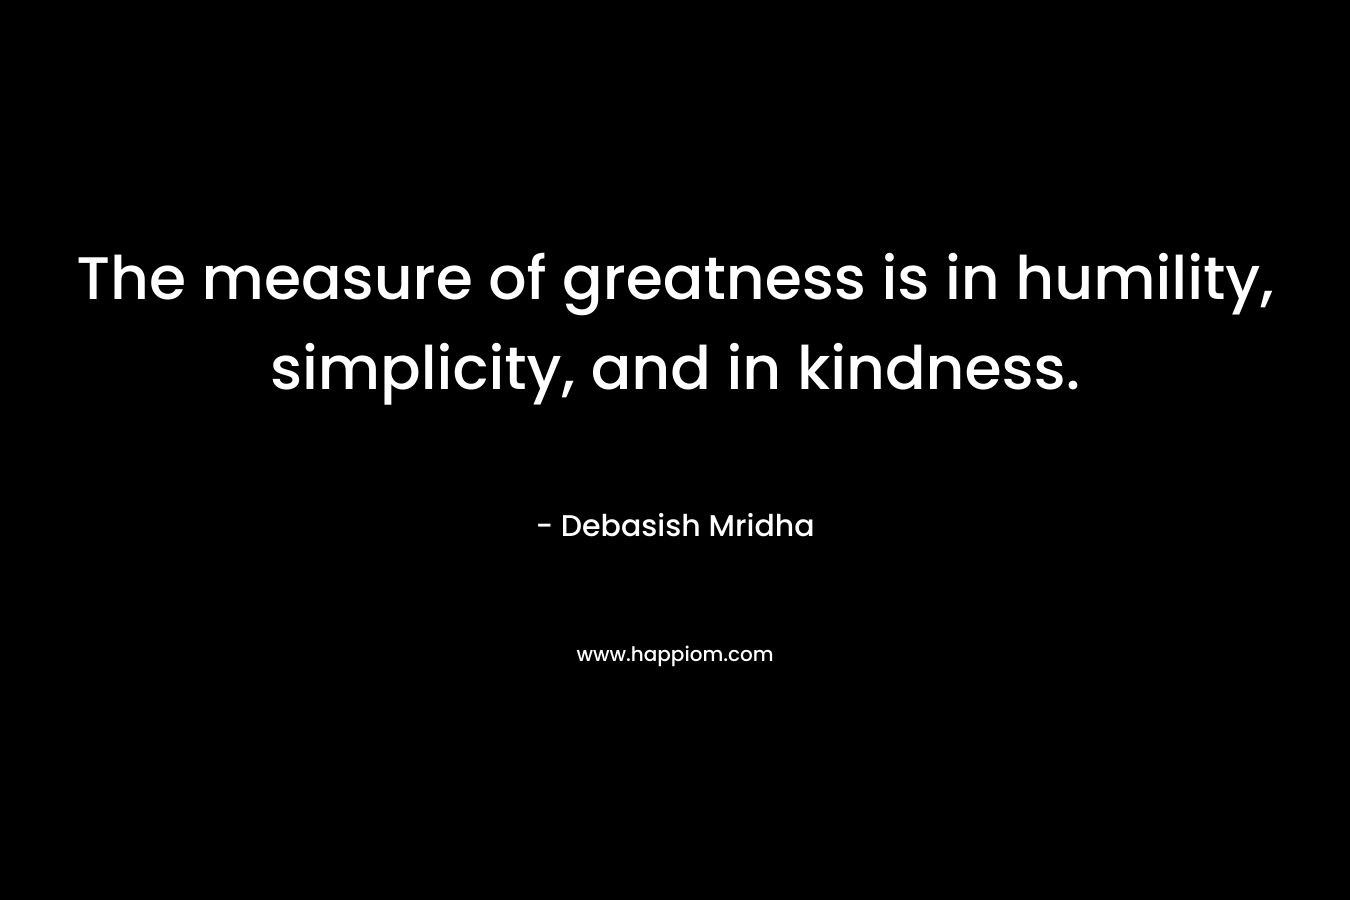 The measure of greatness is in humility, simplicity, and in kindness.